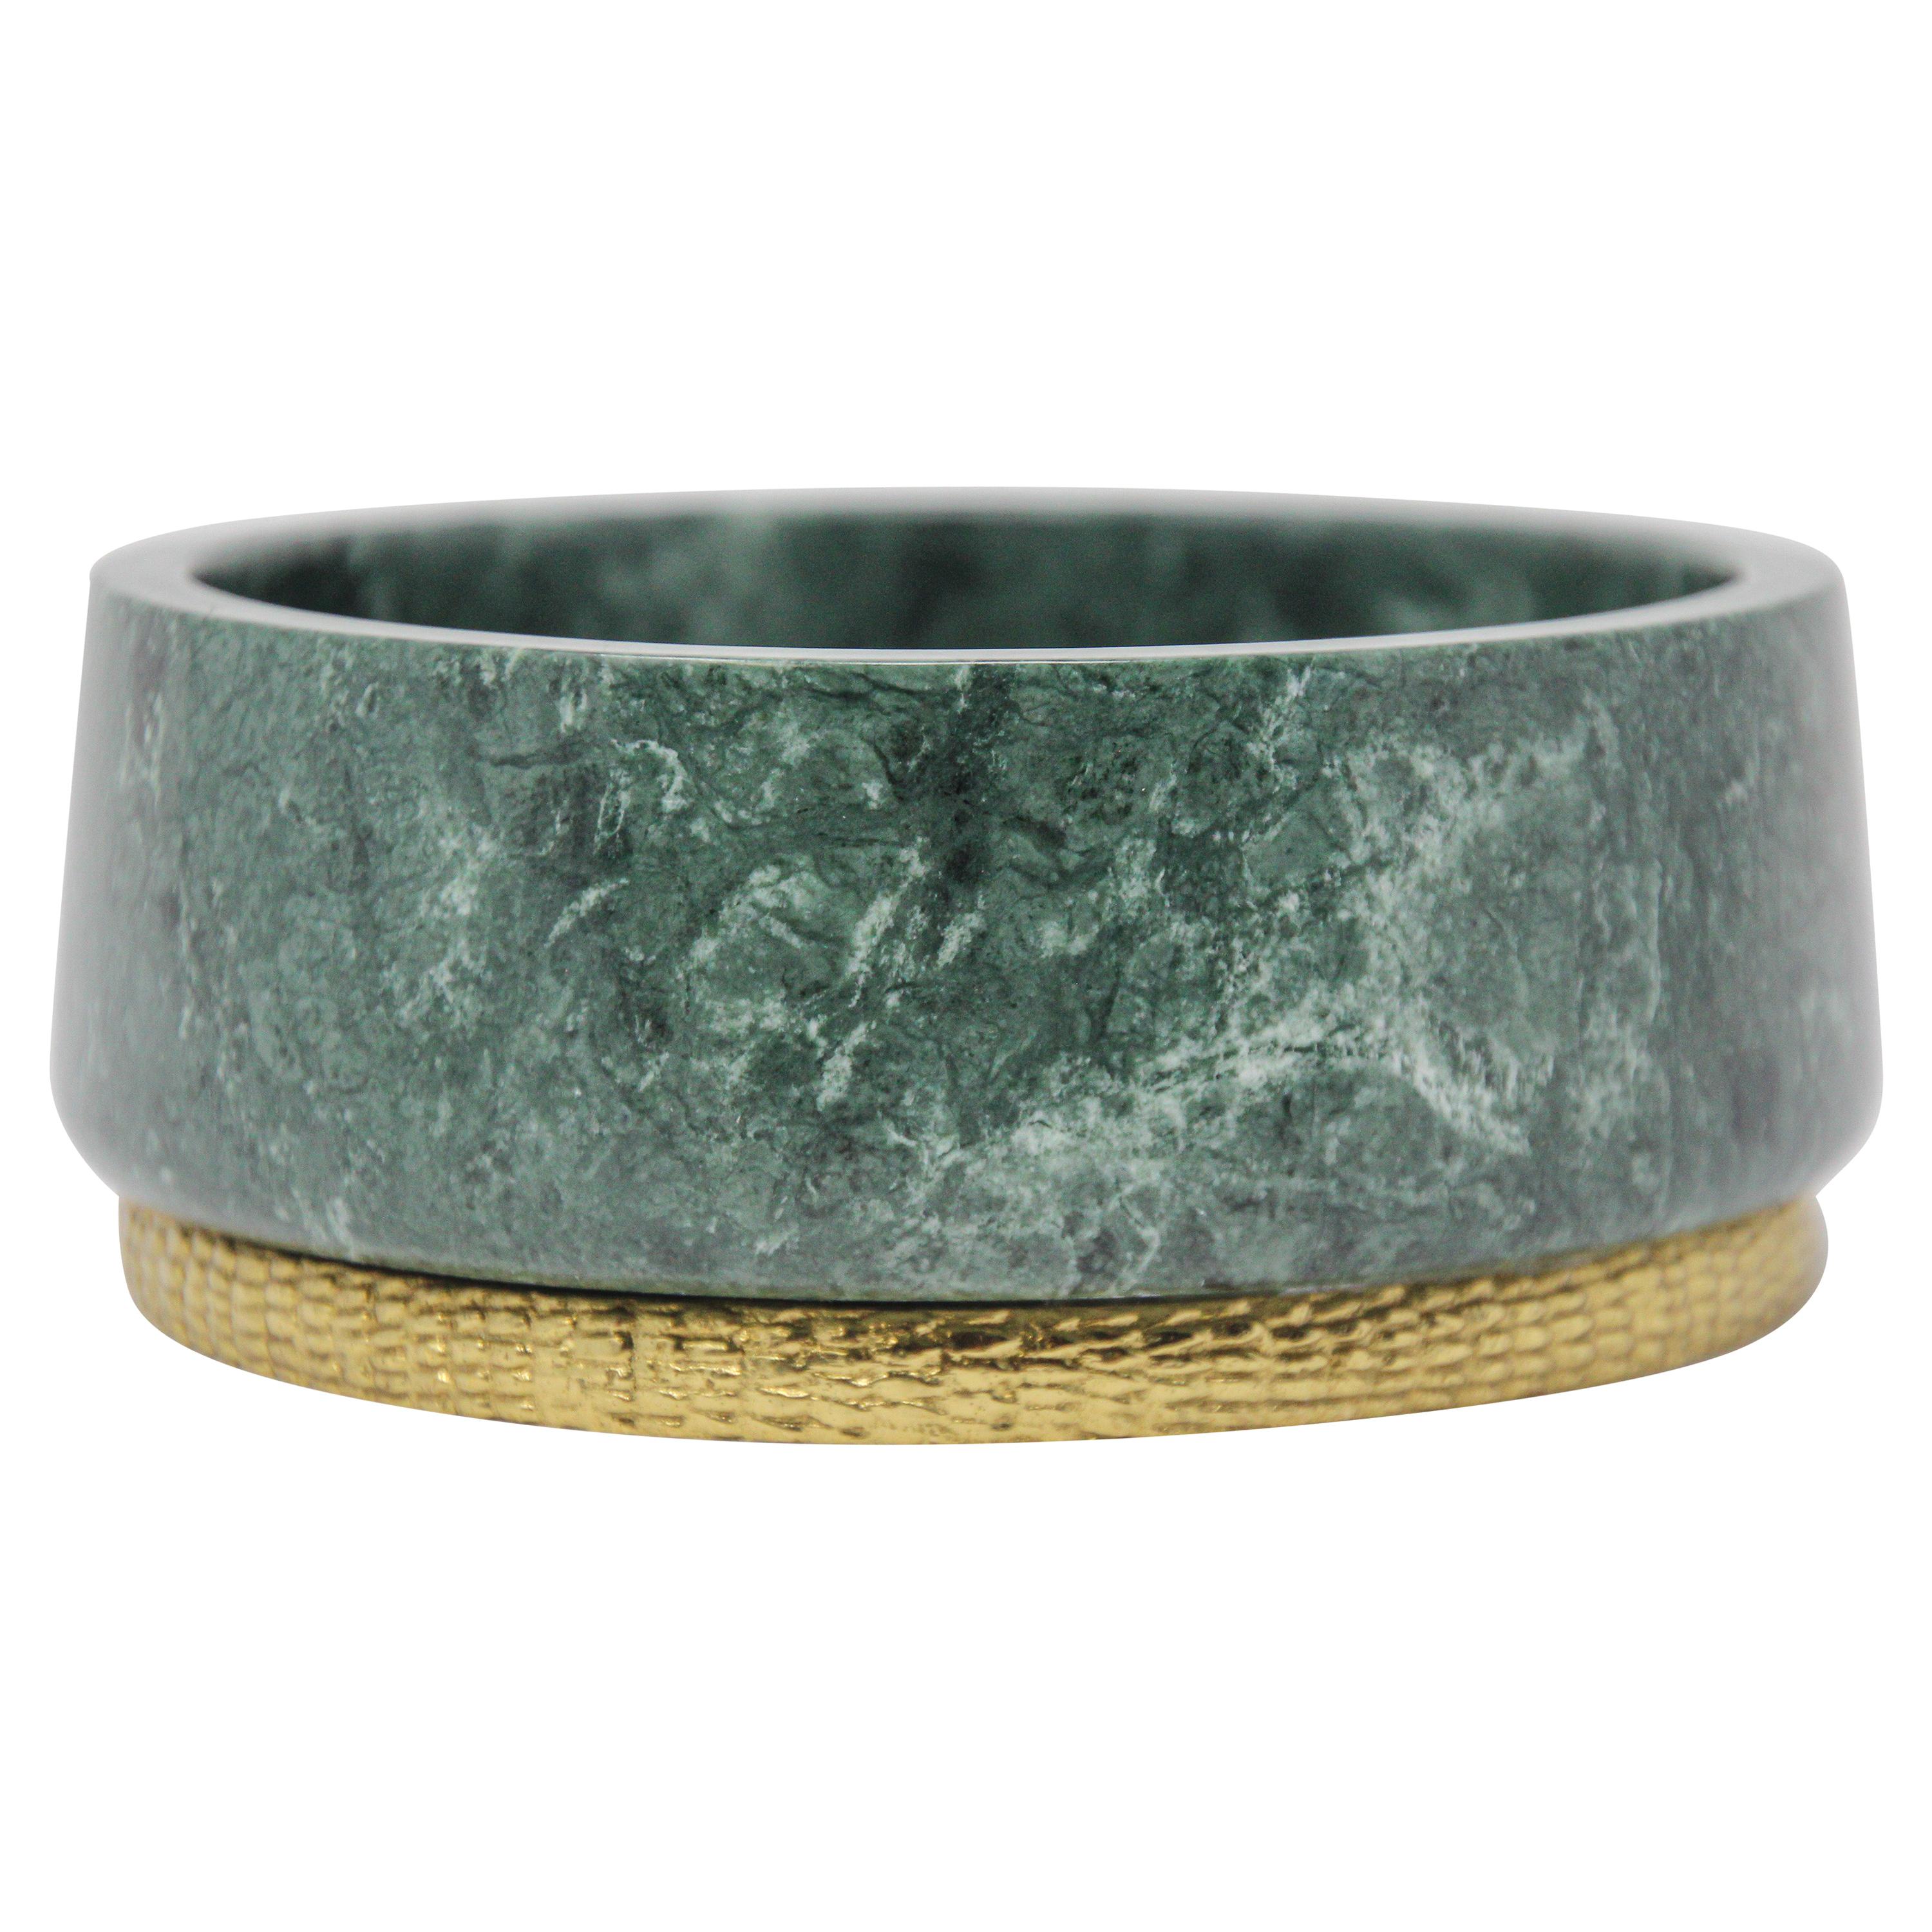 Michael Aram Green Marble and Brass Footed Bowl